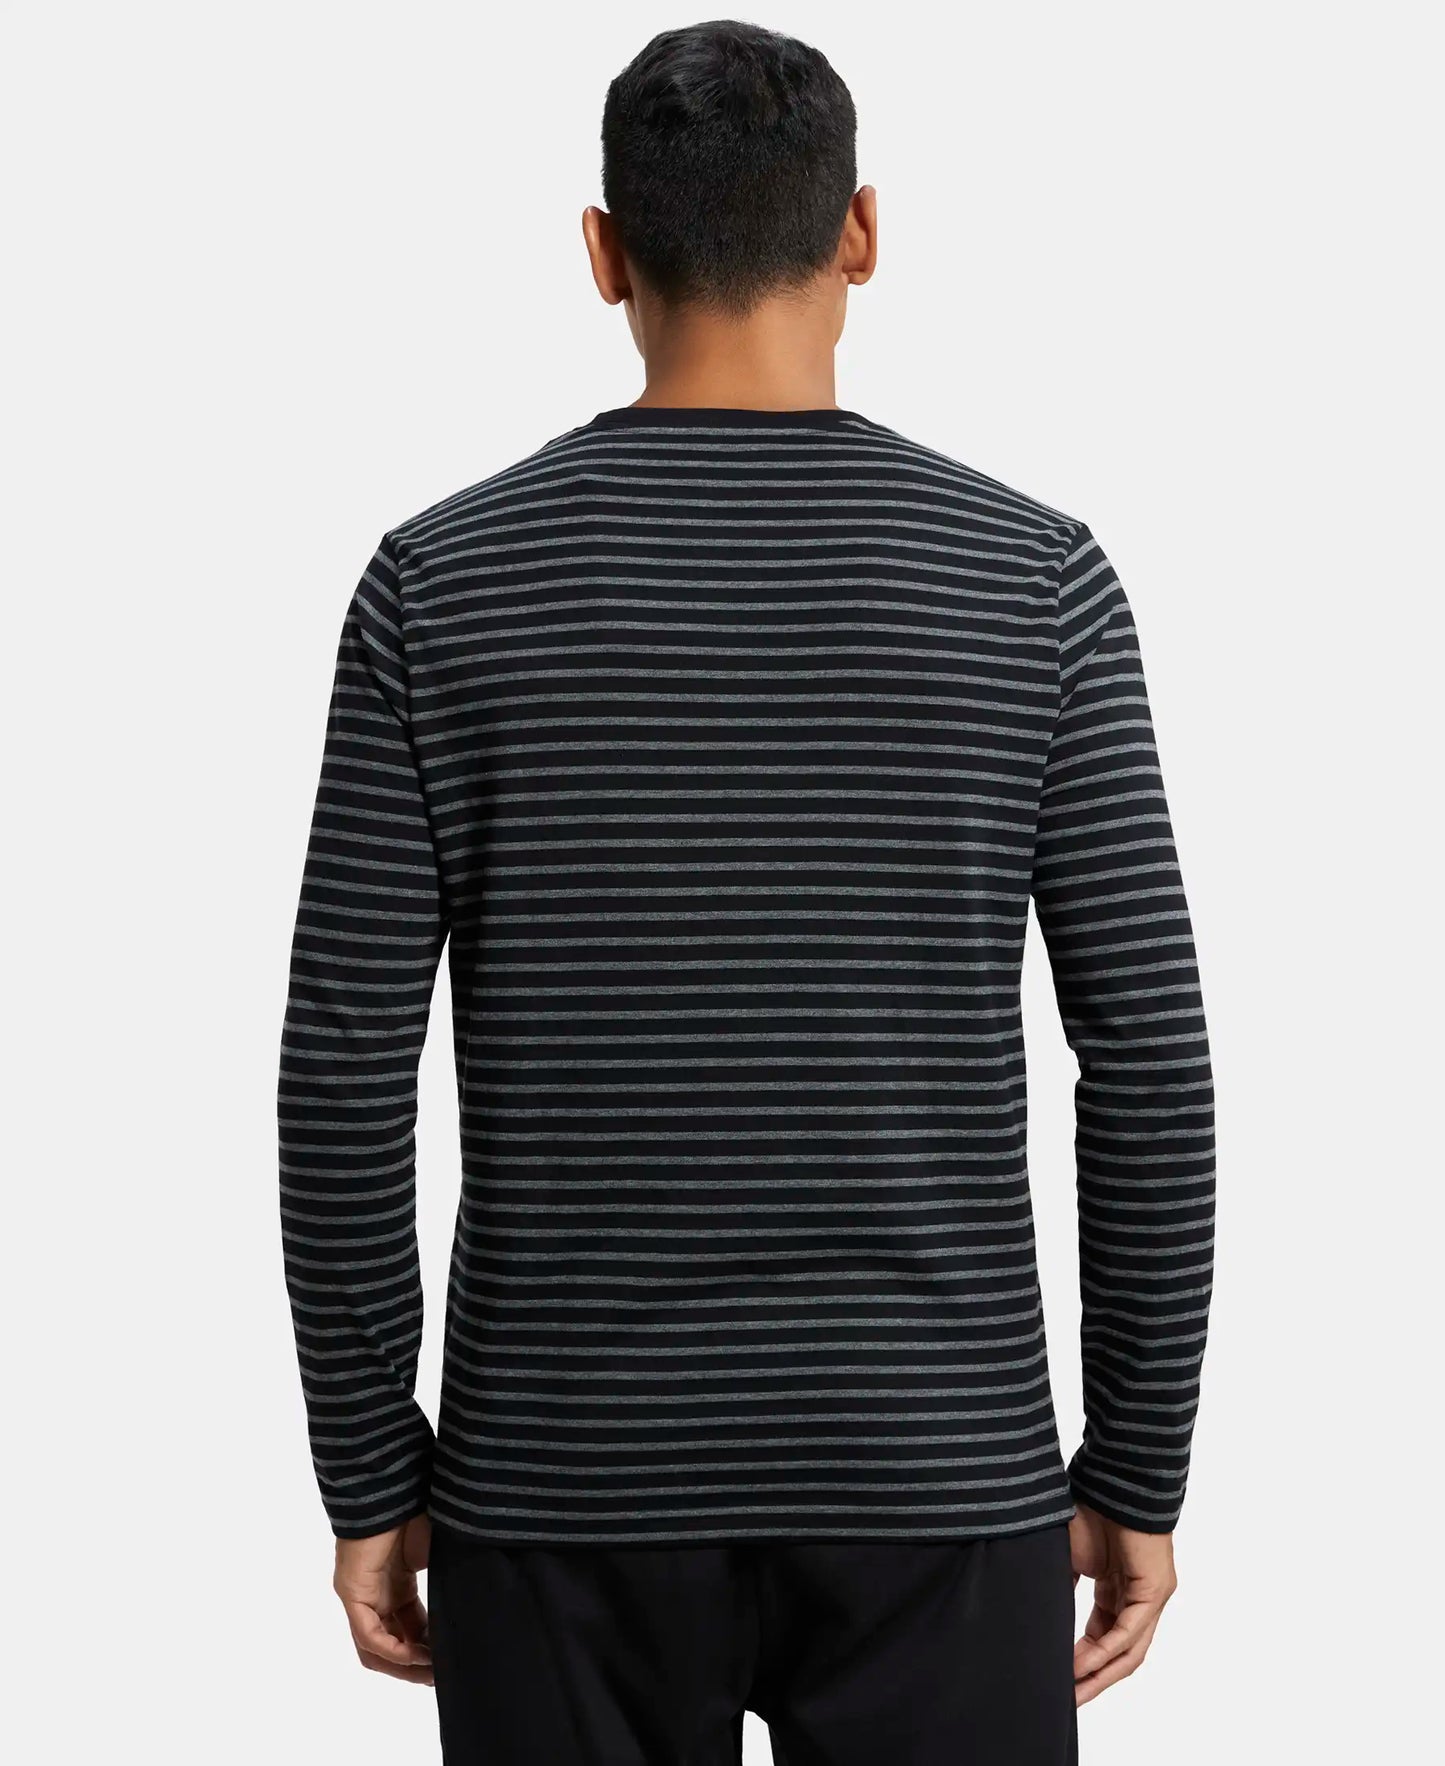 Super Combed Cotton Rich Striped Round Neck Full Sleeve T-Shirt - Black & Charcoal Melange-3